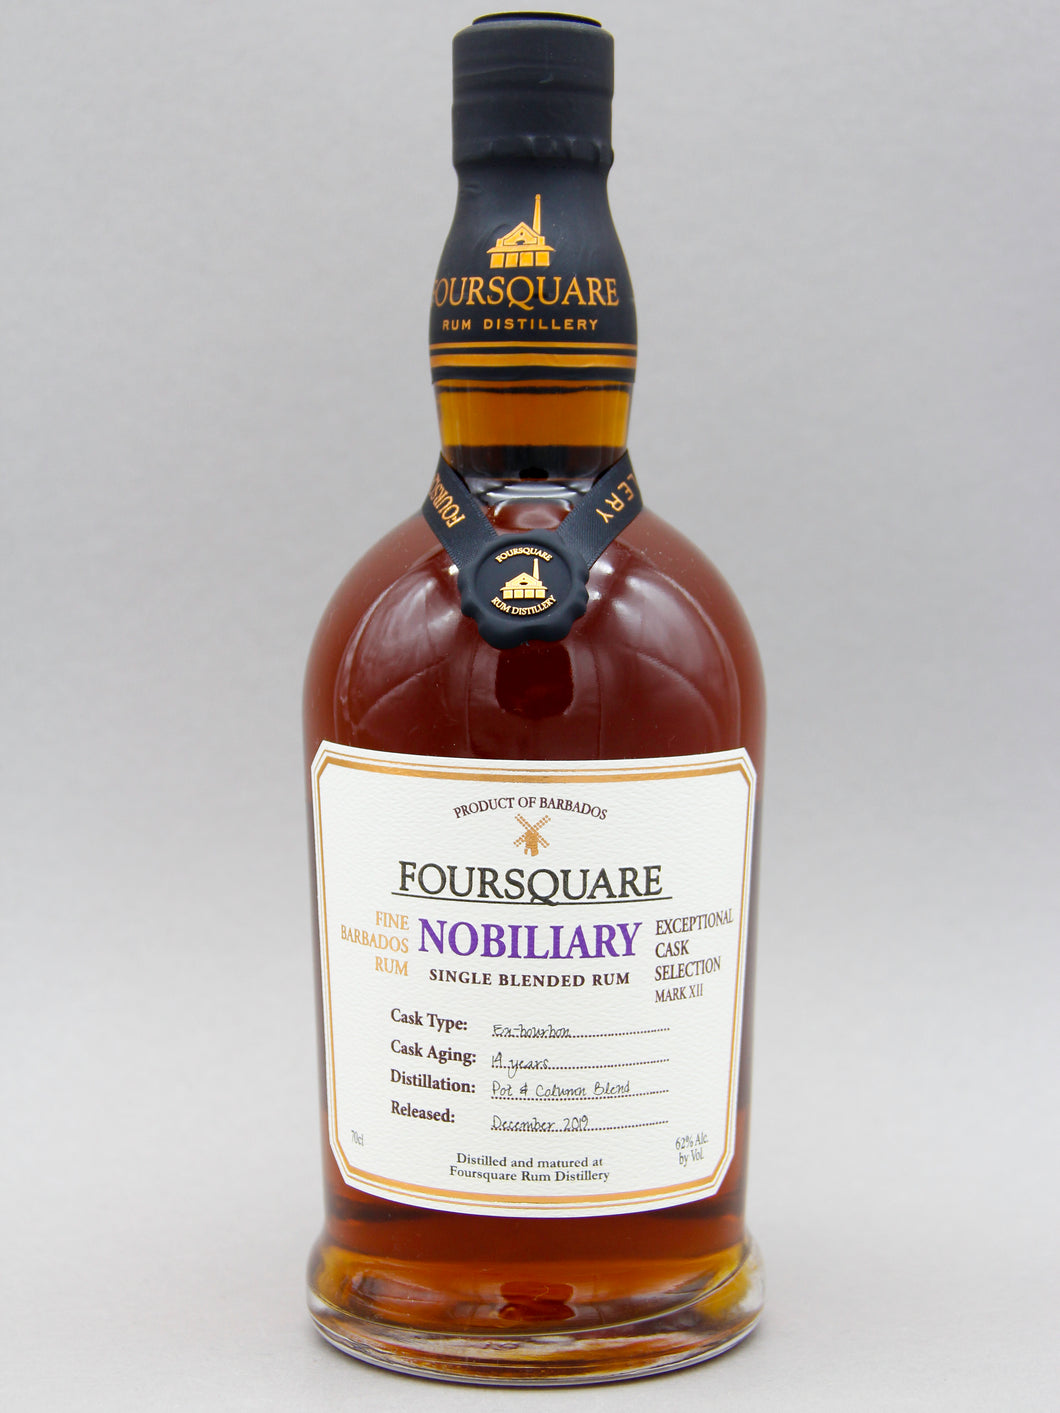 Foursquare Exceptional Cask Selection: Nobiliary, Single Blended Rum, 14 Years, Barbados (62%, 70cl)